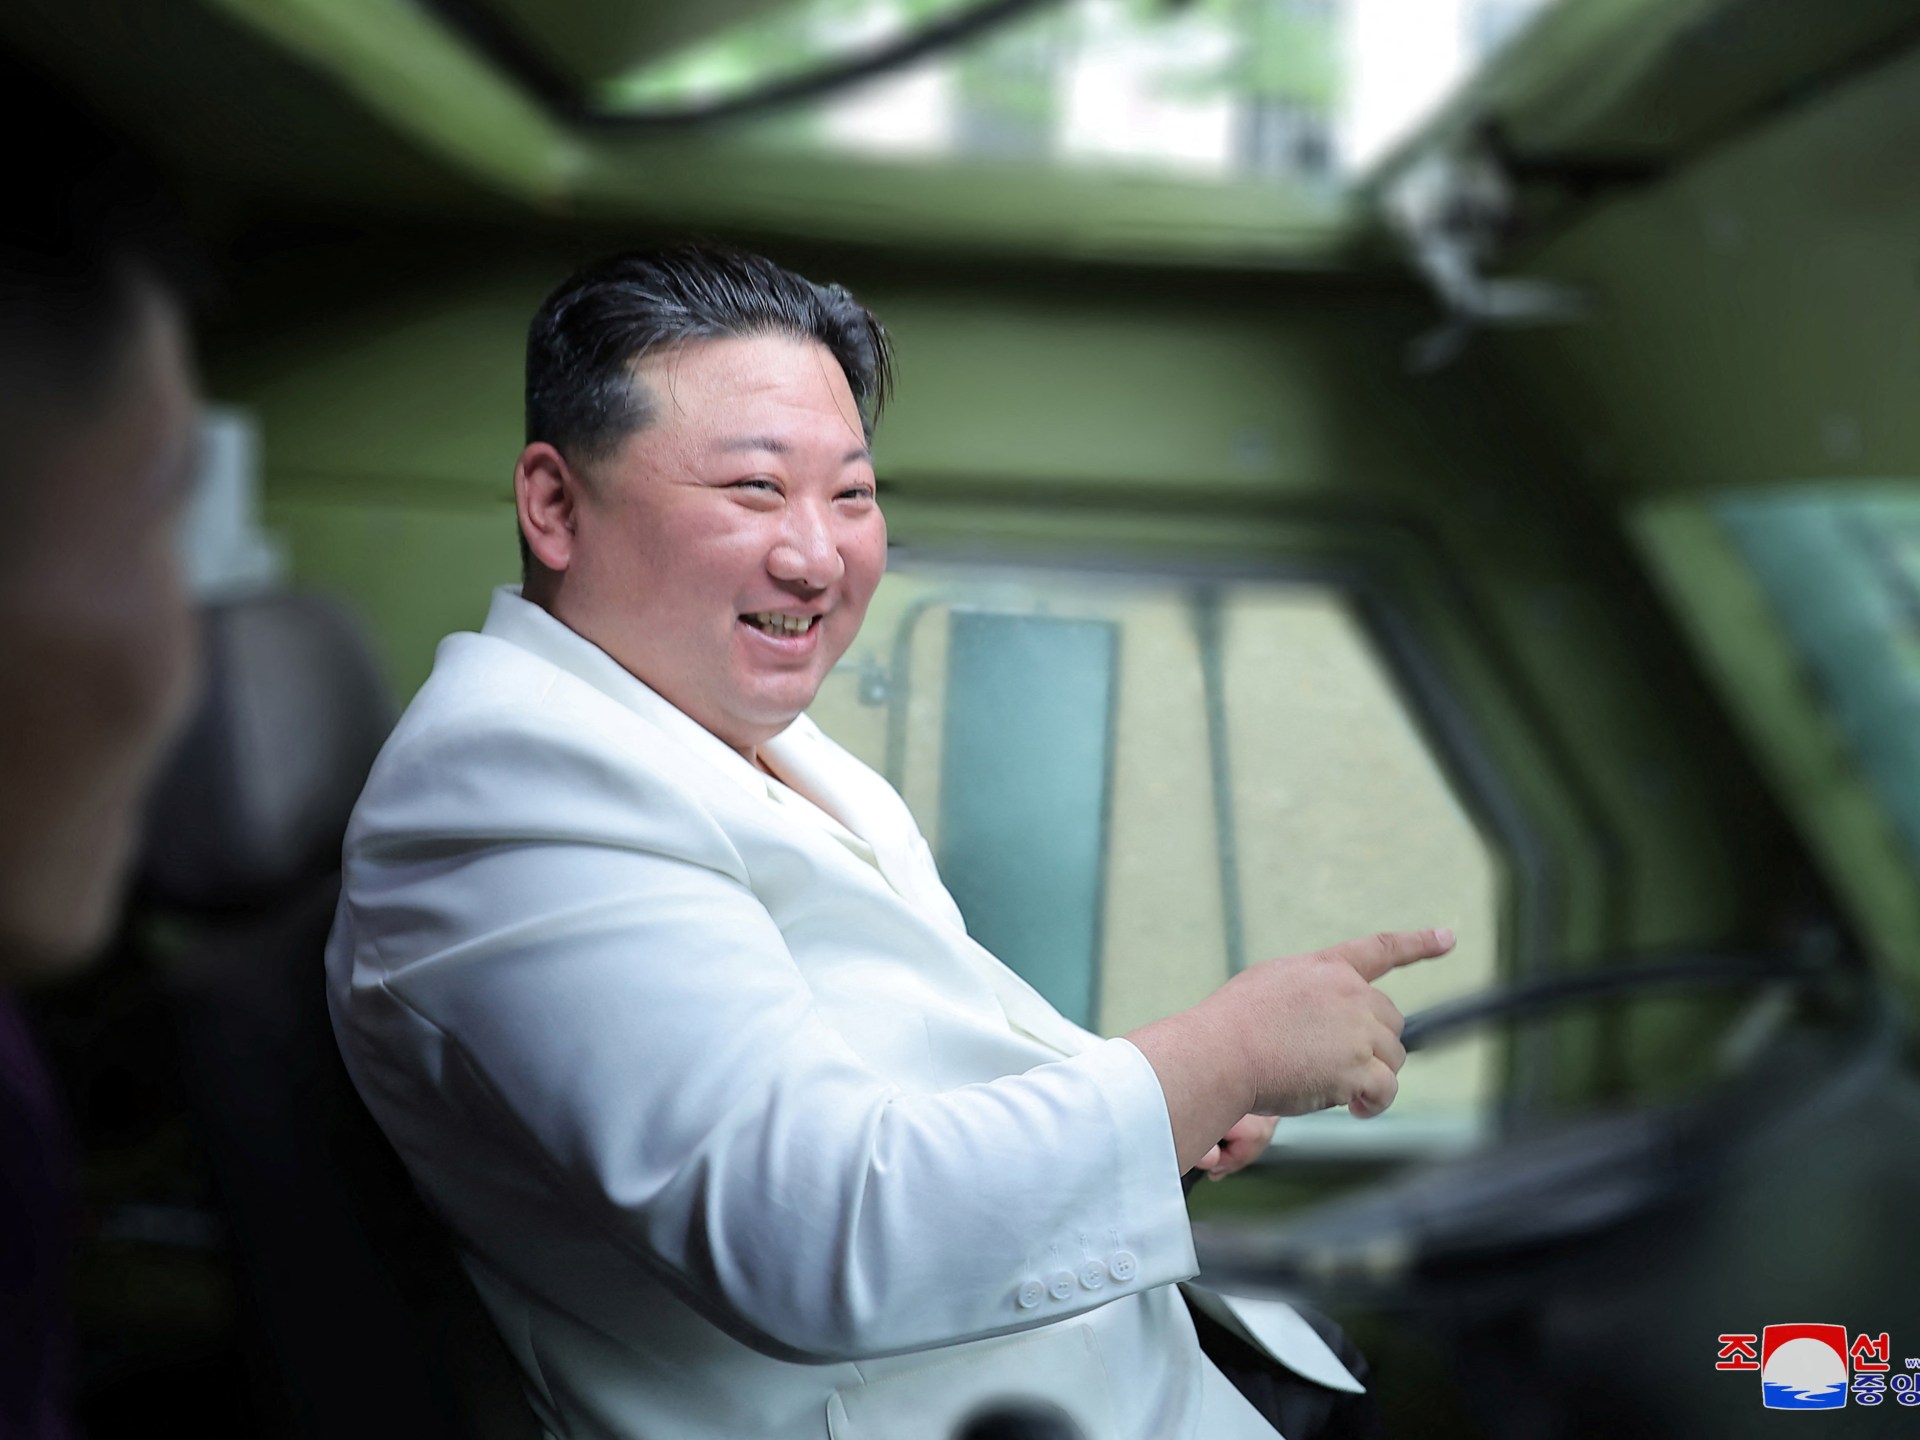 N Korea’s Kim orders ‘drastic boost’ in production of missiles, shells